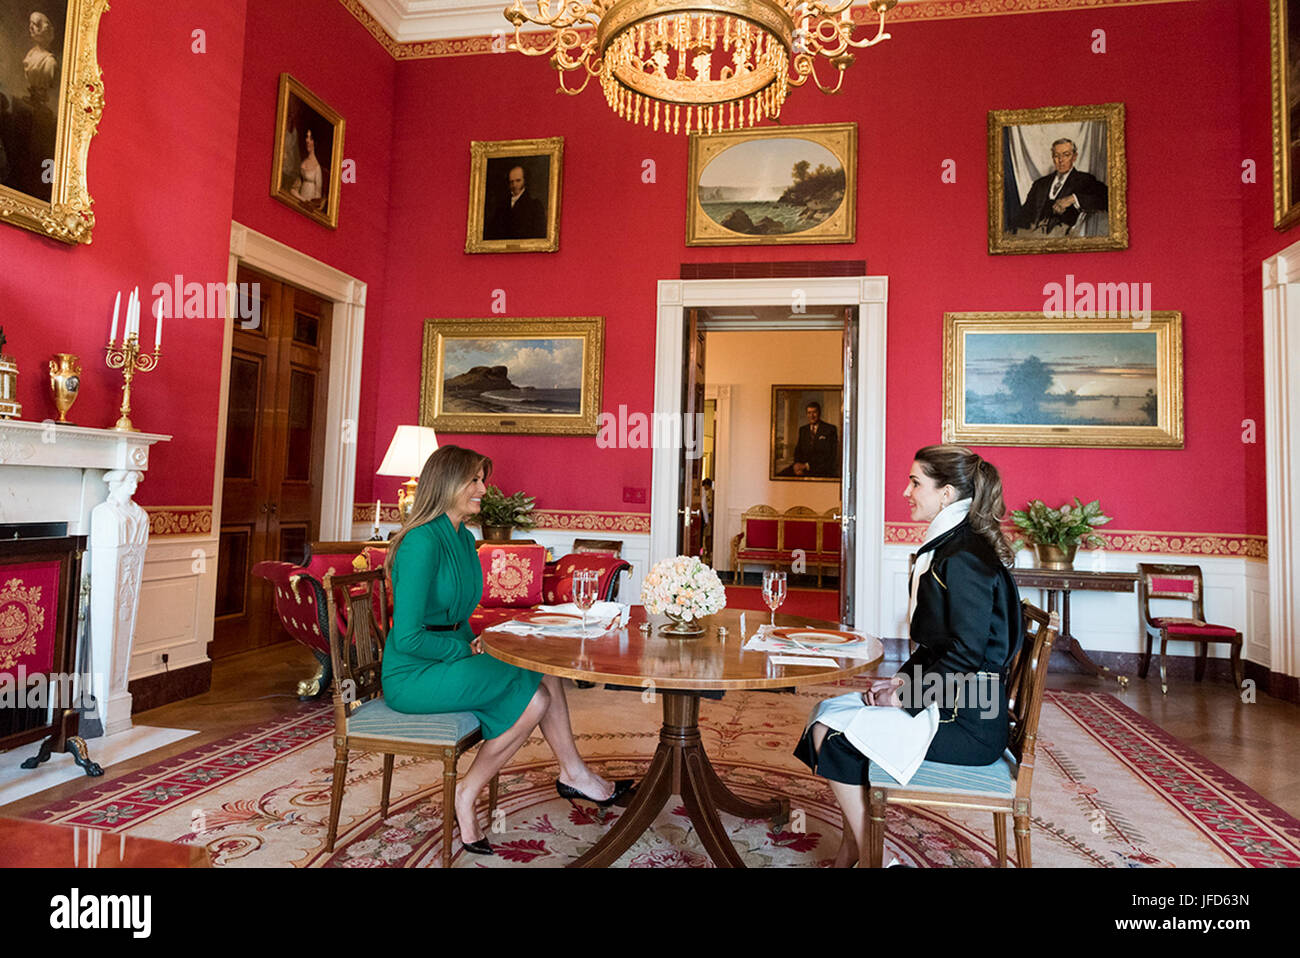 First Lady Melania Trump and Queen Rania Al-Abdullah of Jordan have lunch in the Red Room of the White House, Wednesday, April 5, 2017, in Washington, D.C. (Official White House Photo by Joyce Boghosian) Stock Photo